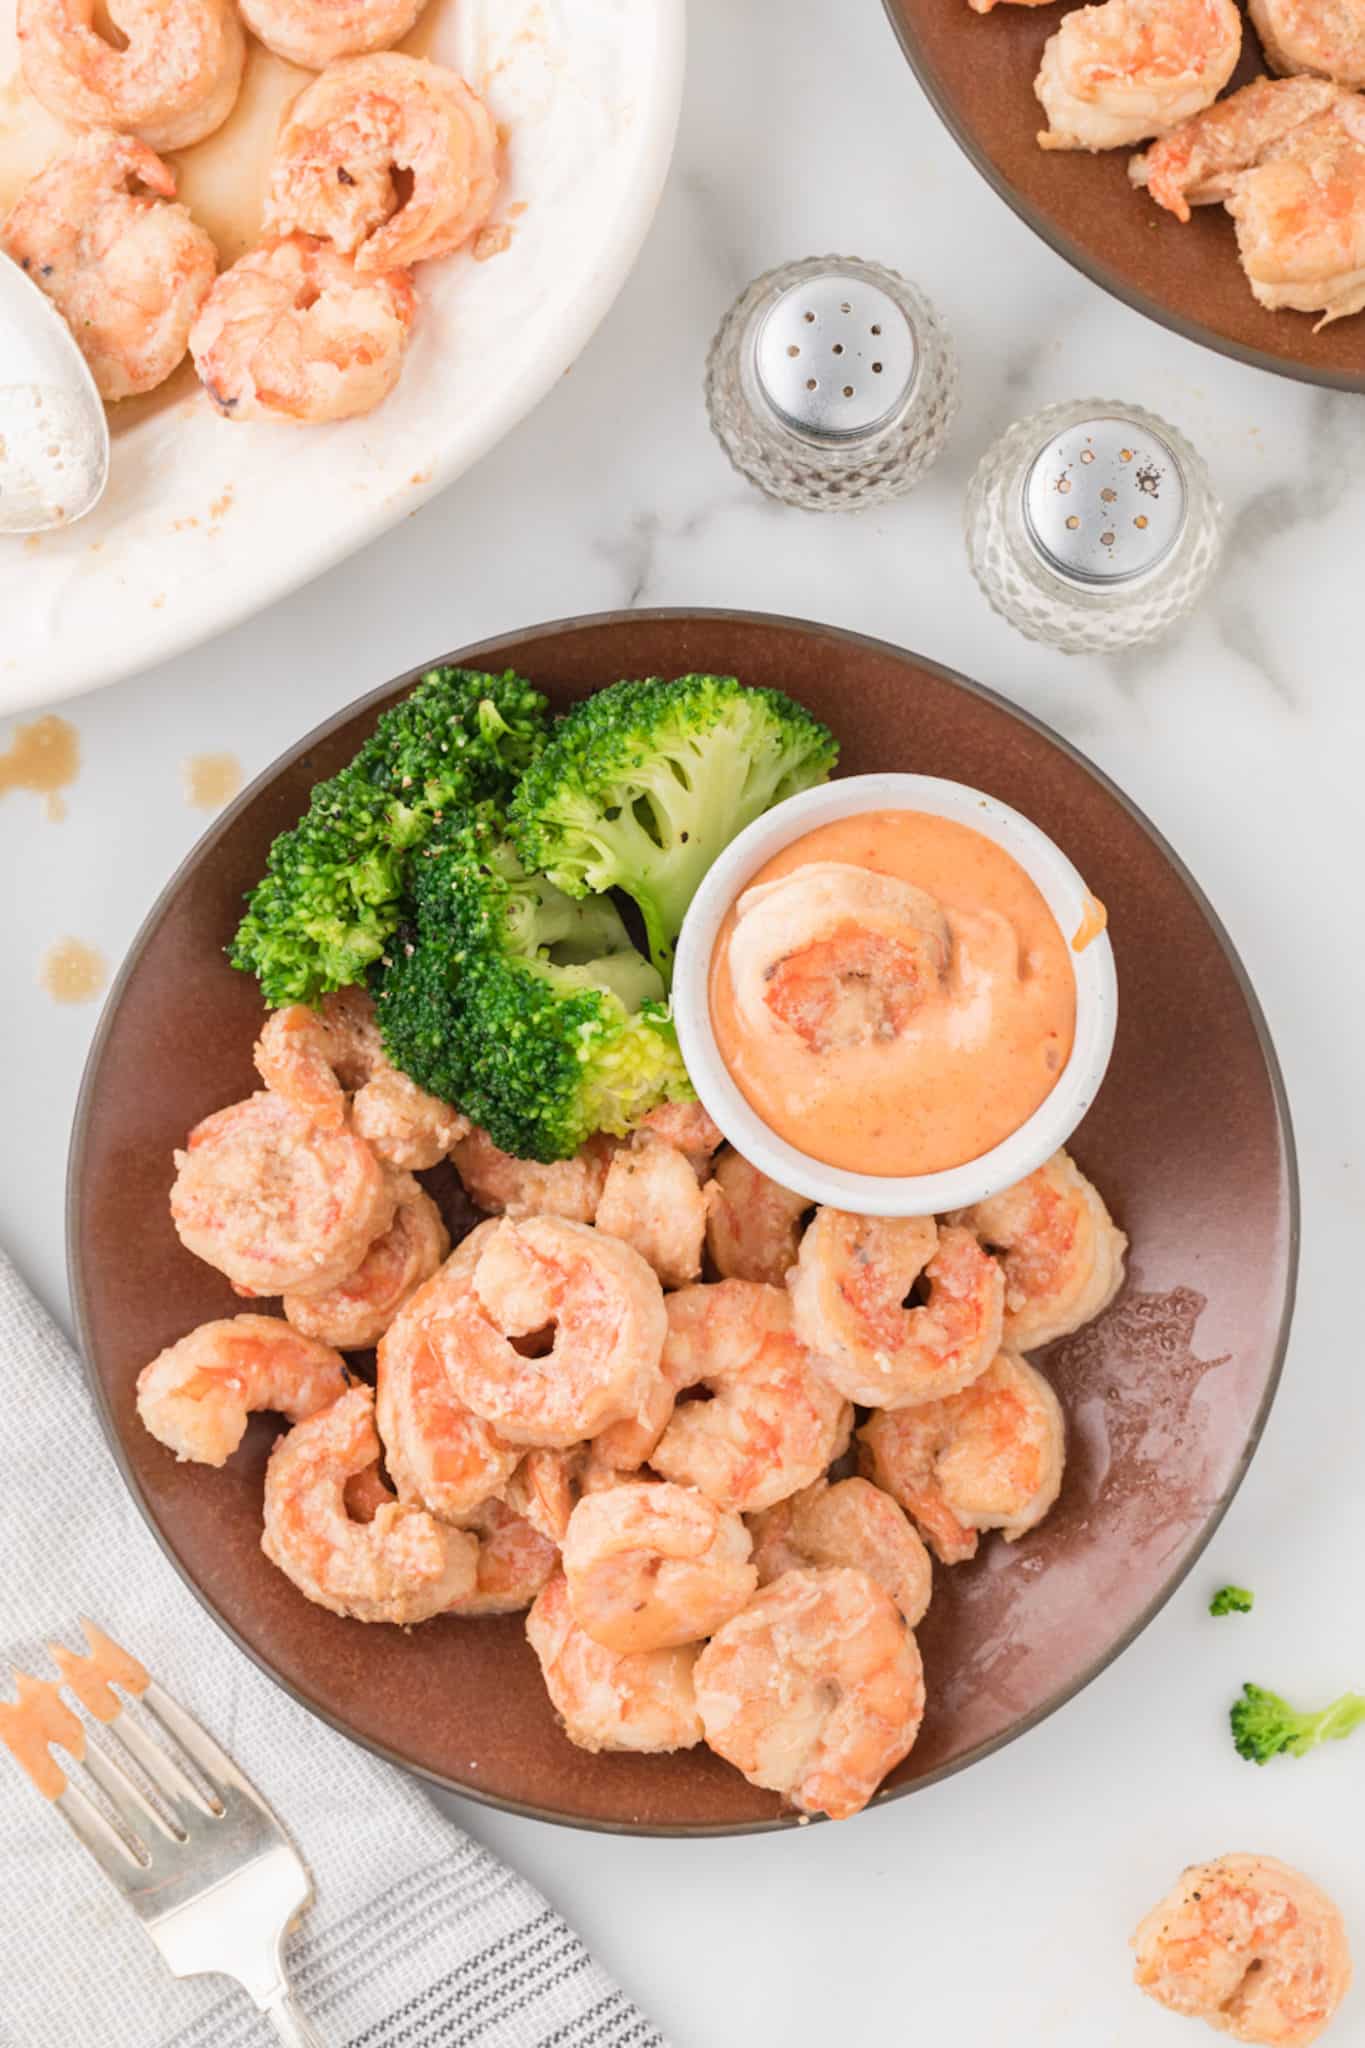 a plate of shrimp and broccoli